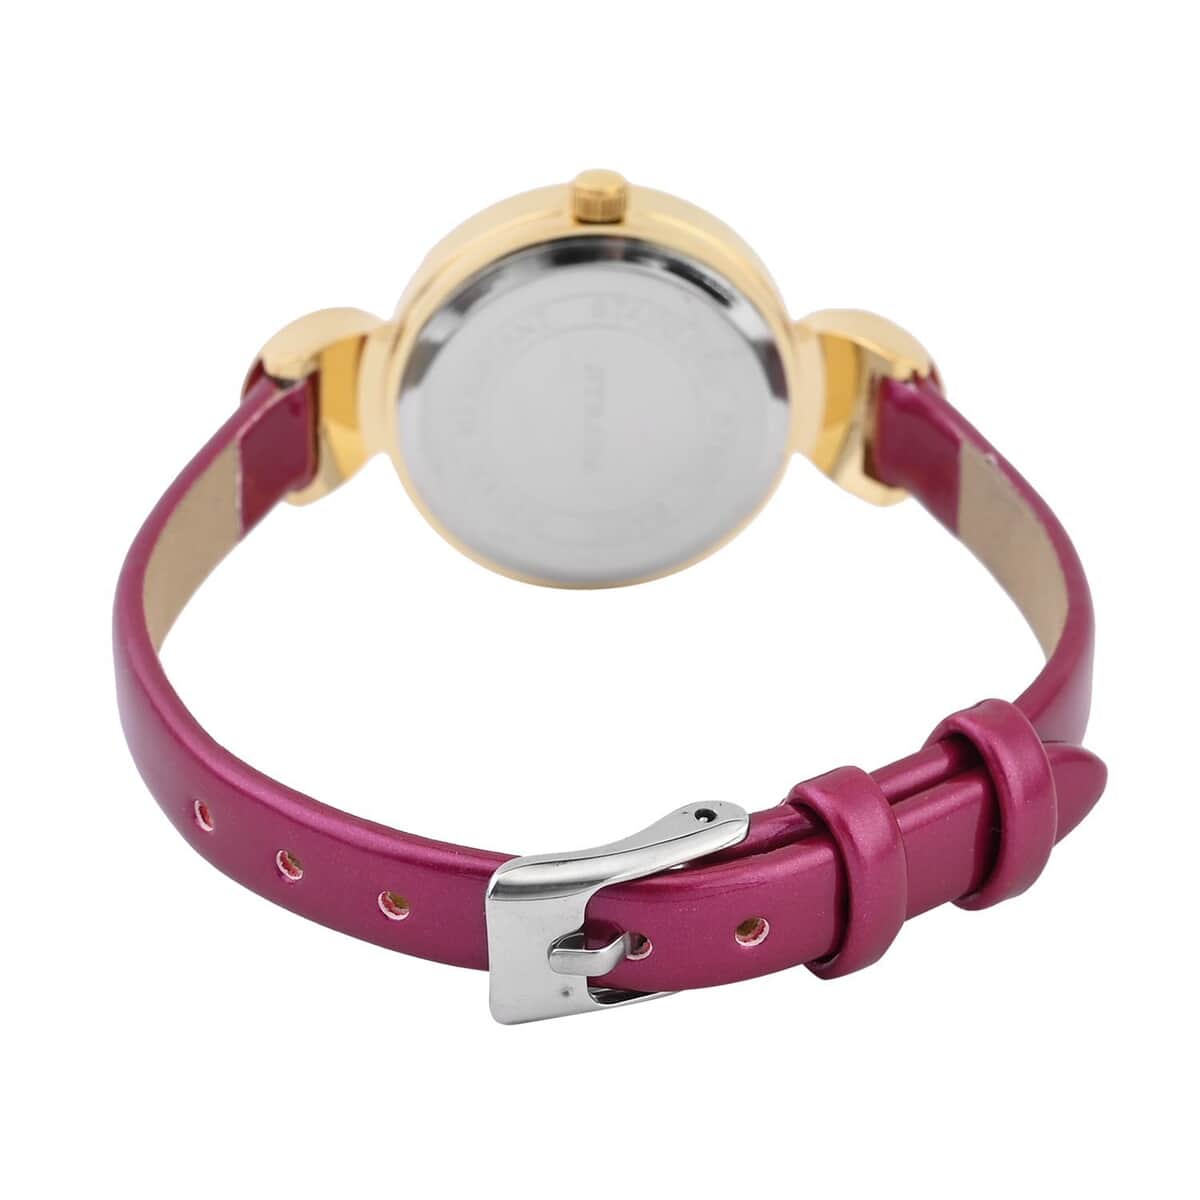 Strada Austrian Crystal Japanese Movement Infinity Watch in Goldtone with Fuchsia Faux Leather Strap (28.20mm) (5.75-7.50 Inches) image number 5